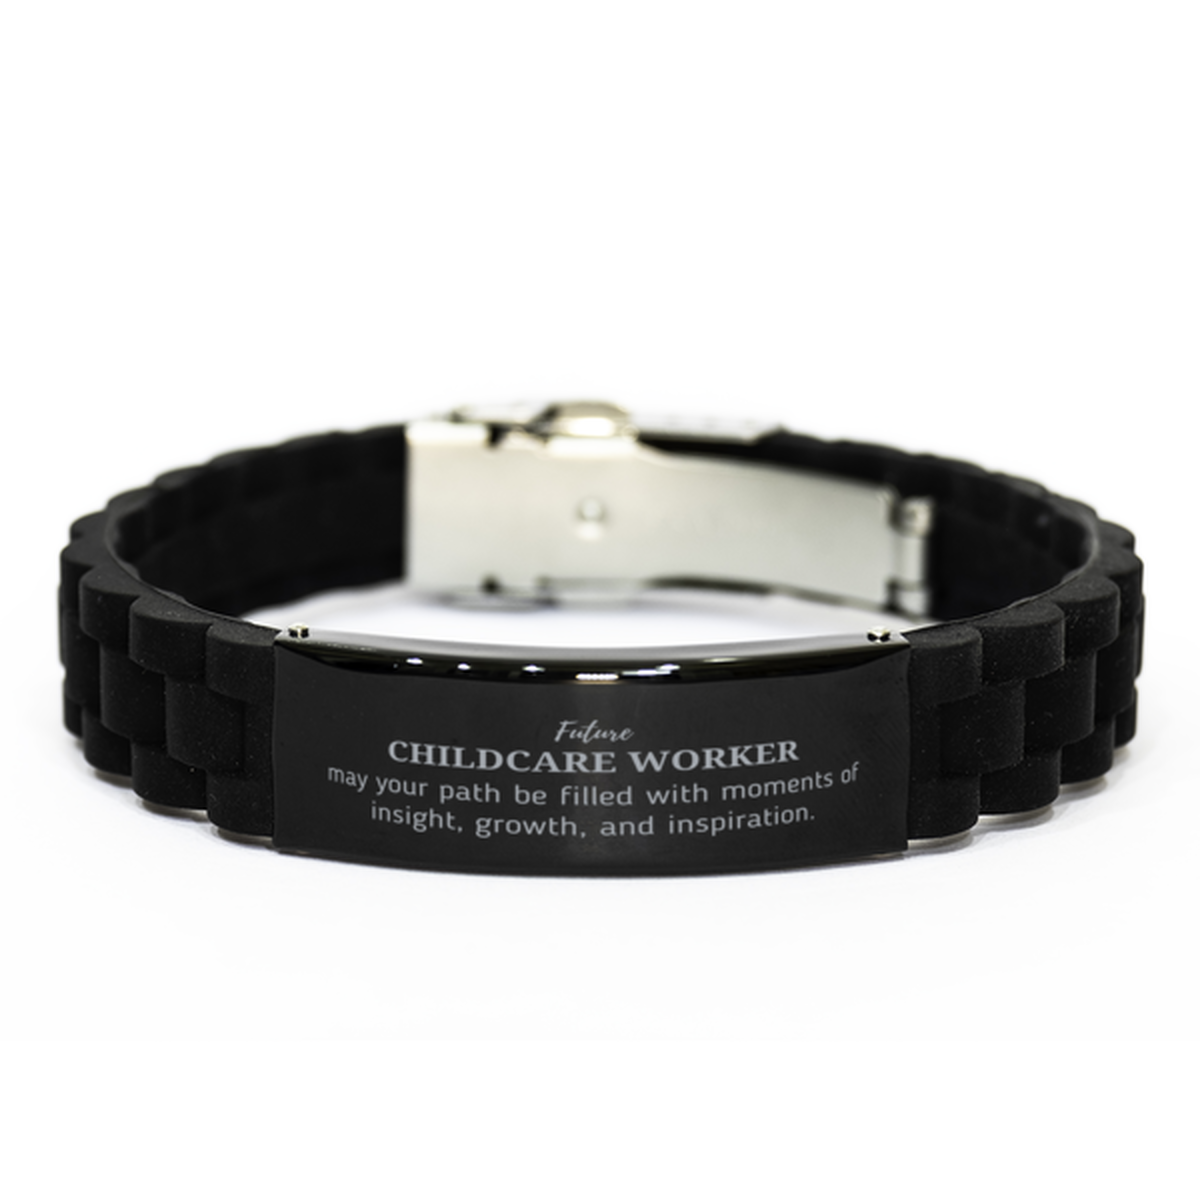 Future Childcare Worker Gifts, May your path be filled with moments of insight, Graduation Gifts for New Childcare Worker, Christmas Unique Black Glidelock Clasp Bracelet For Men, Women, Friends